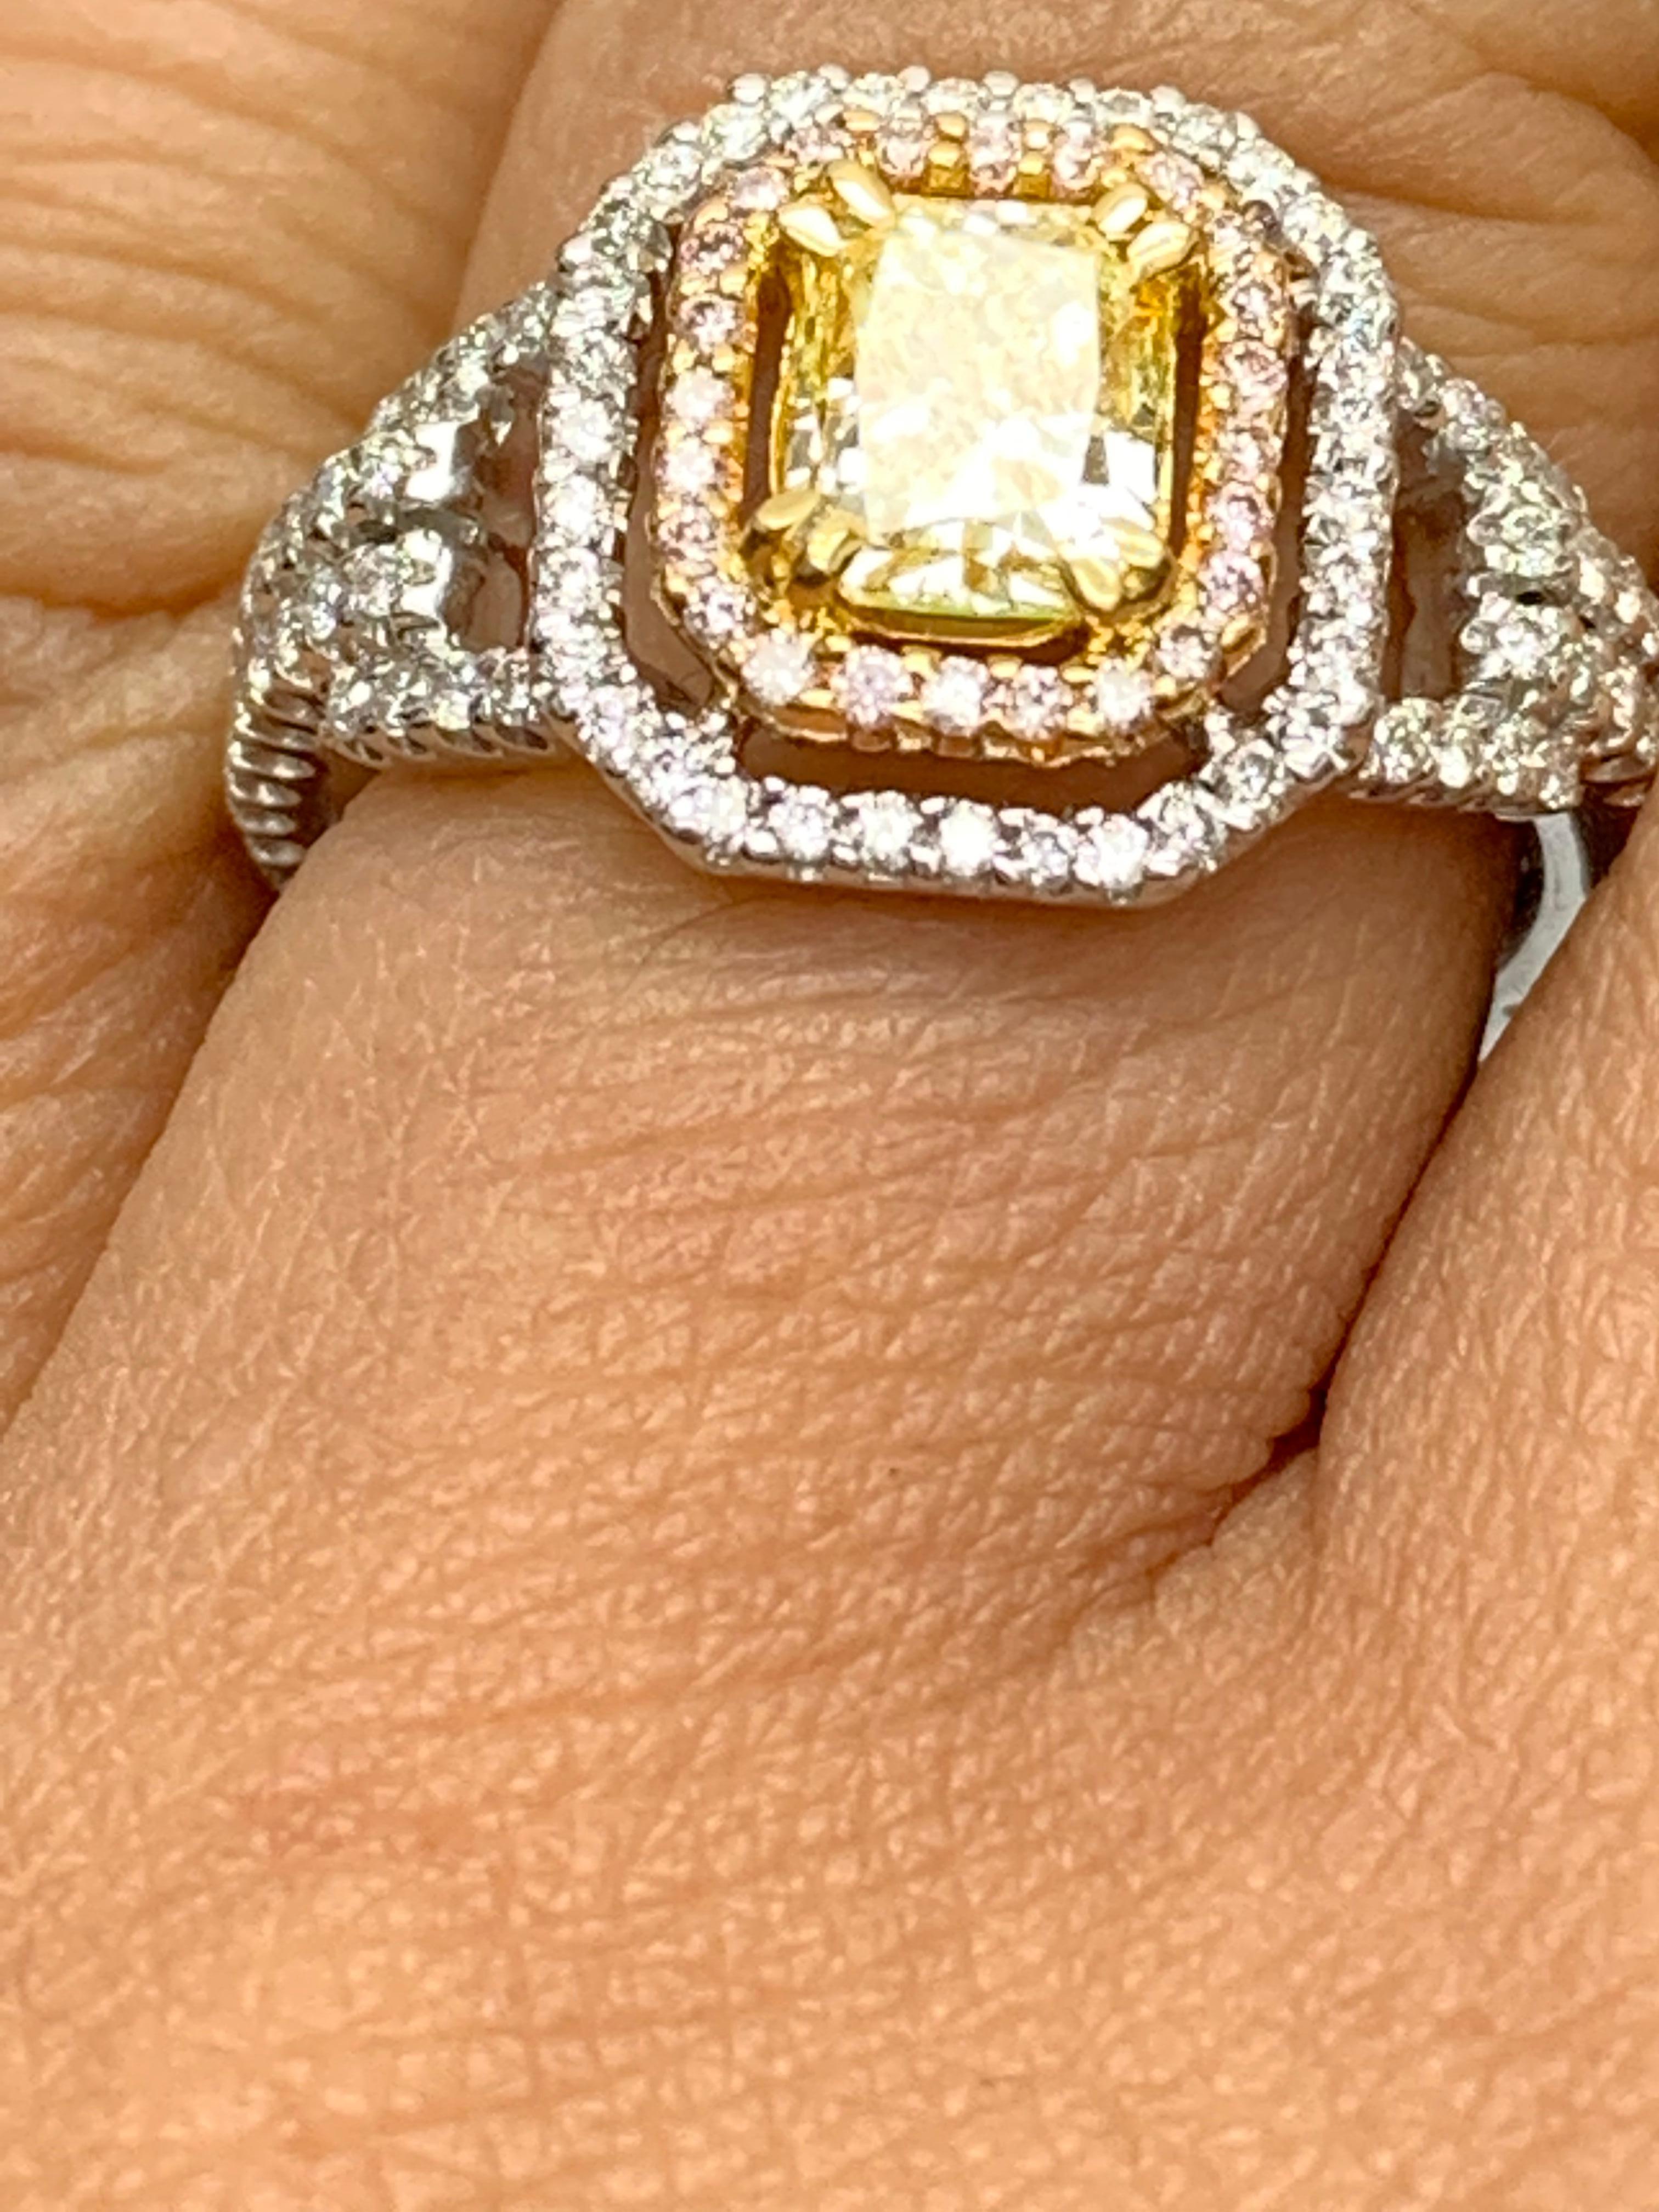 1 Carat Emerald Cut Yellow Diamond Ring in 18k Mix Gold For Sale 3